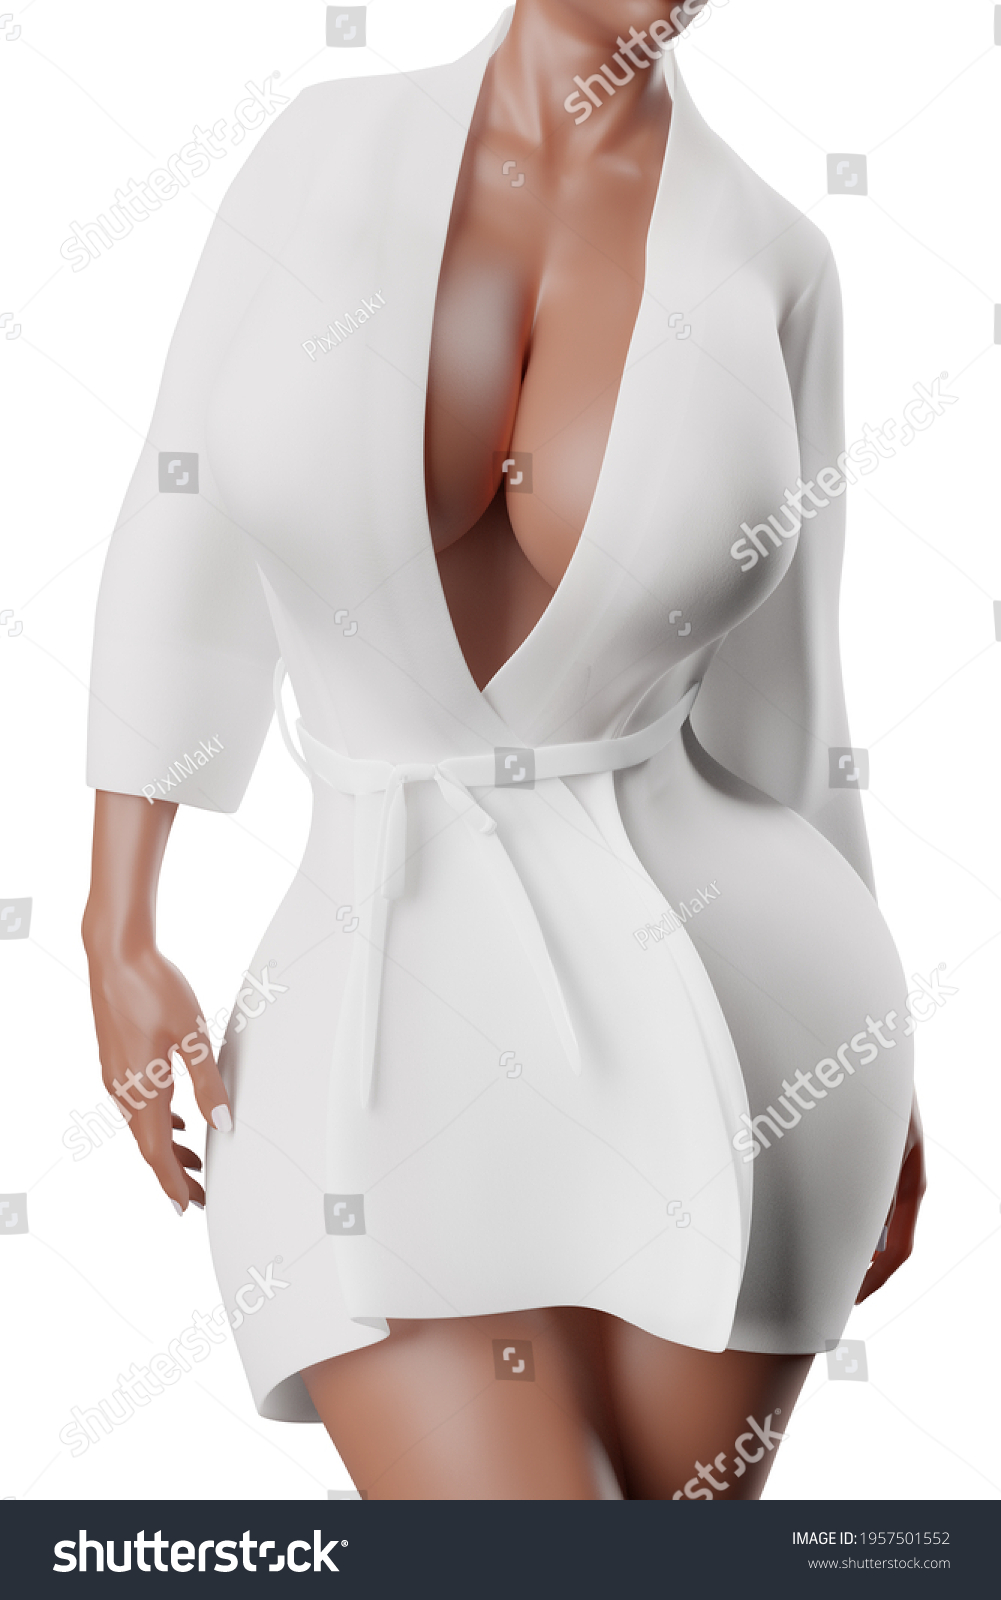 Busty Woman Clothes Cut Off